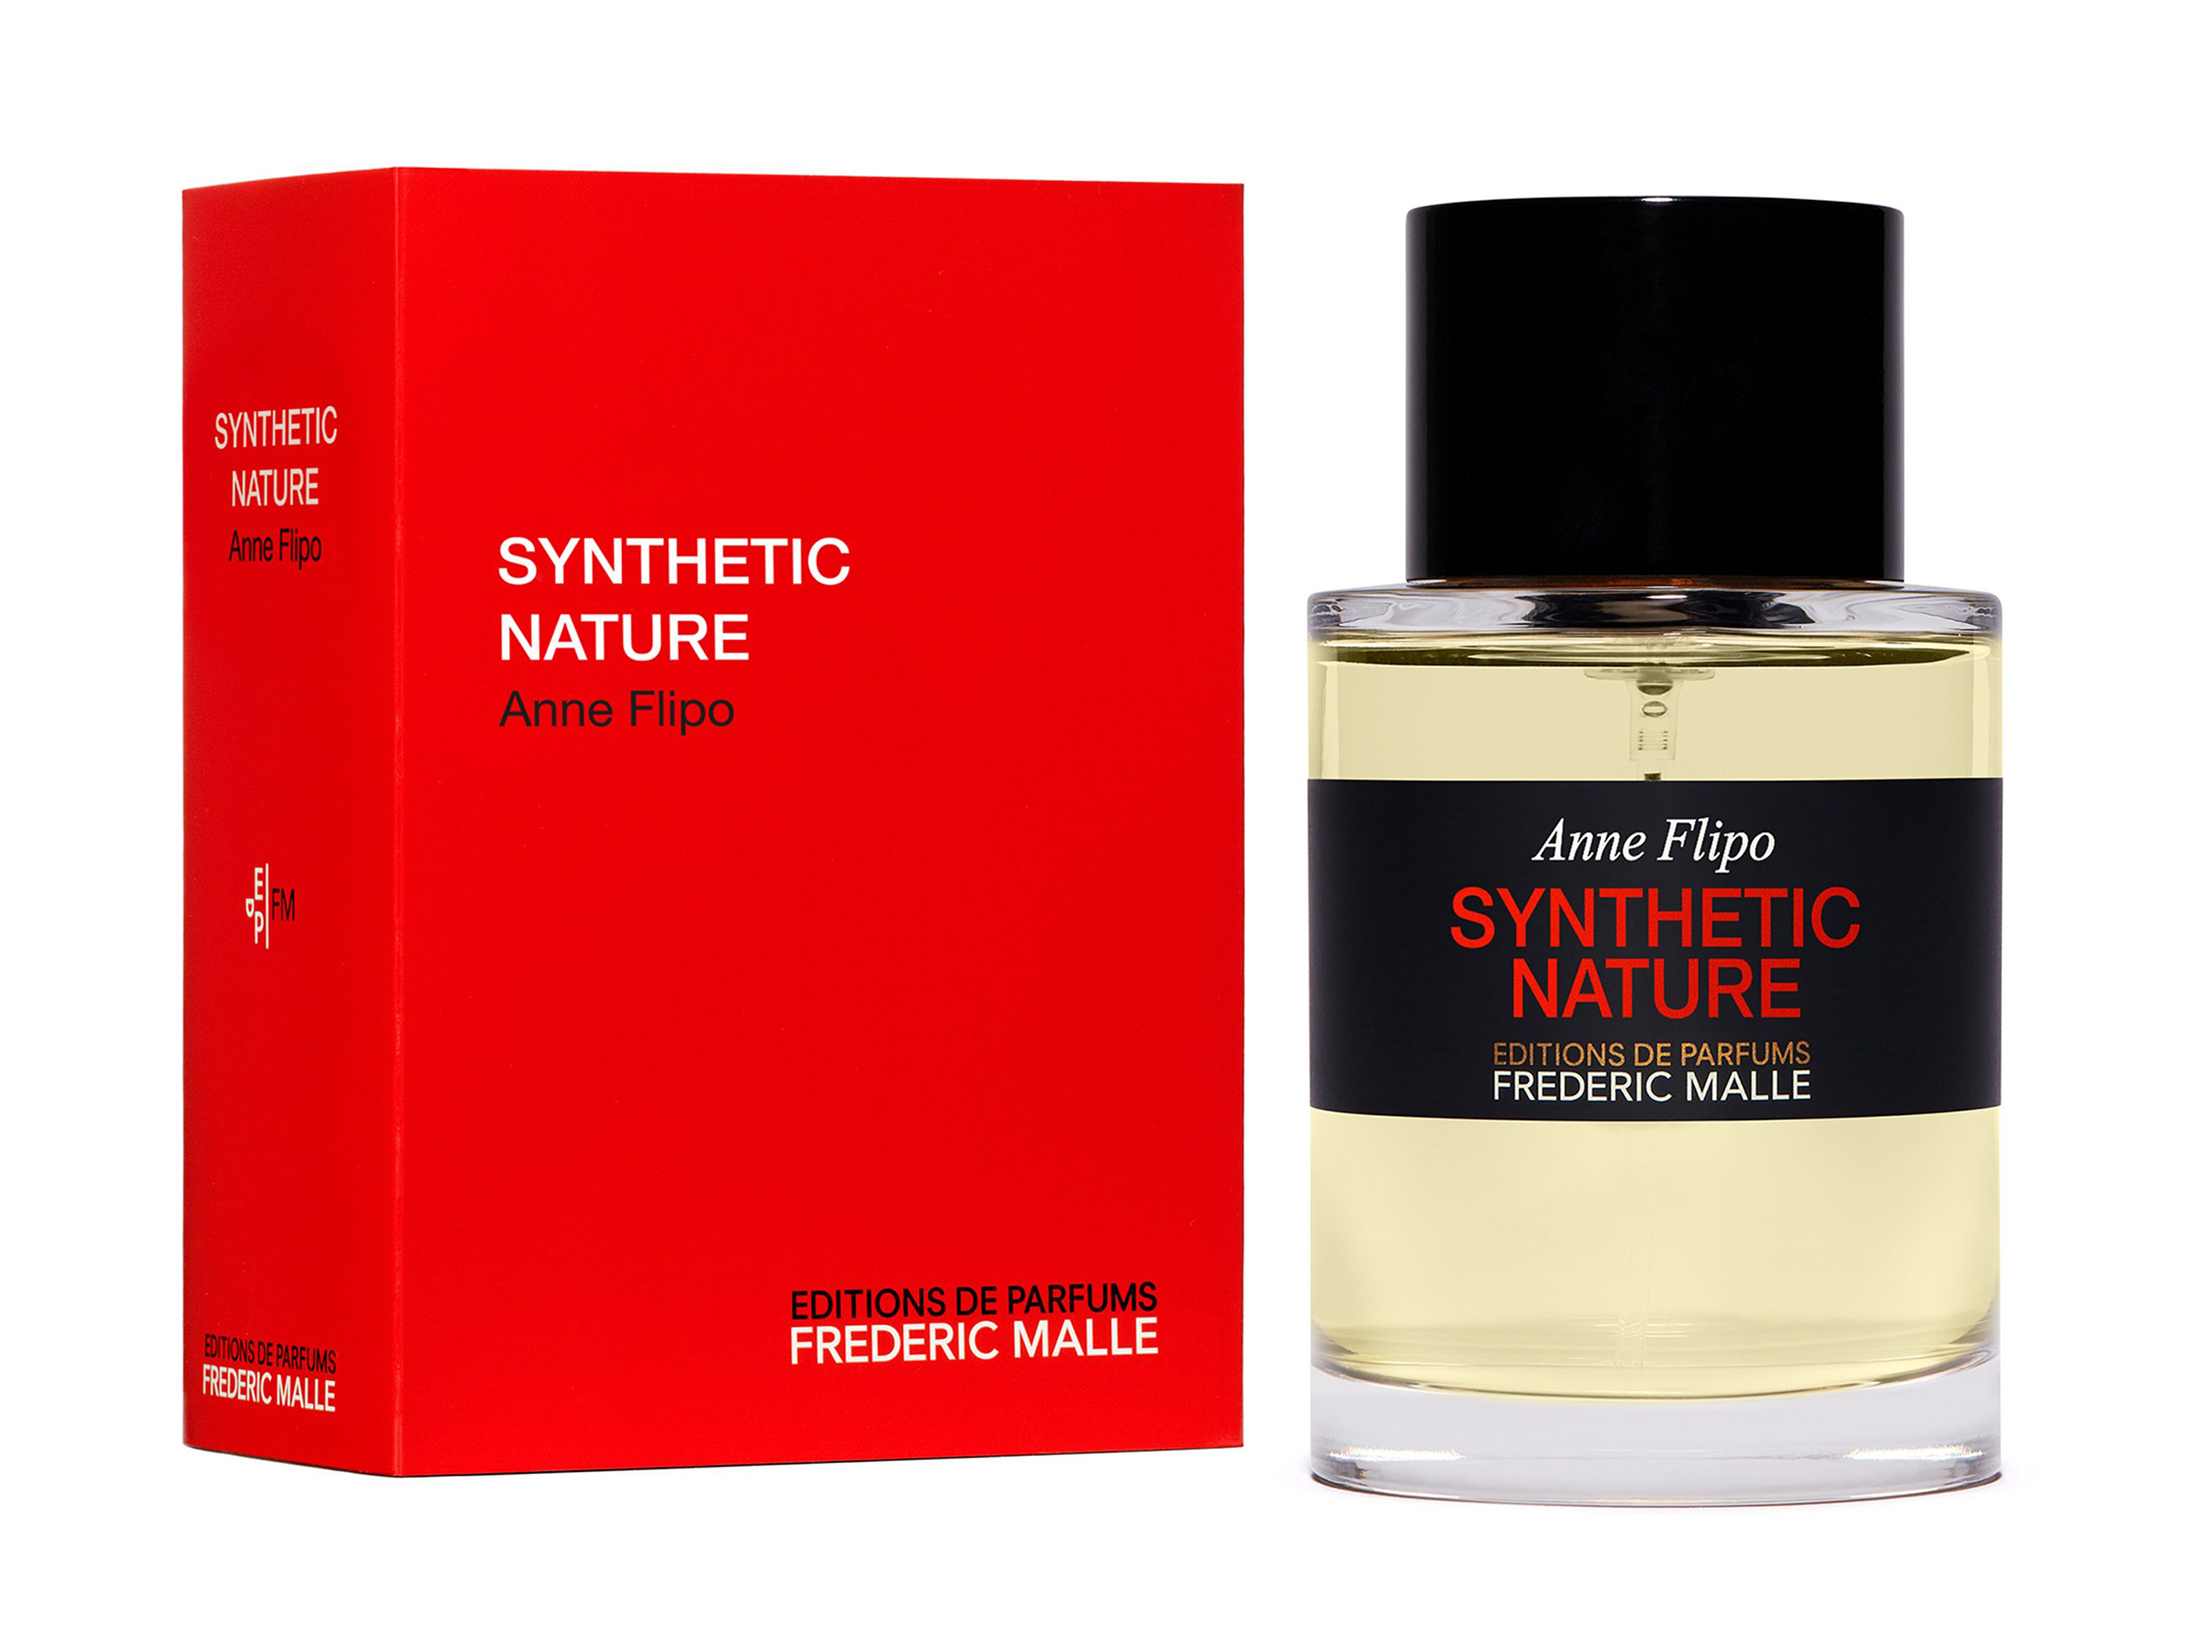 FREDERIC MALLE Synthetic Nature by Anne Flipo ~ Fragrancias Nicho